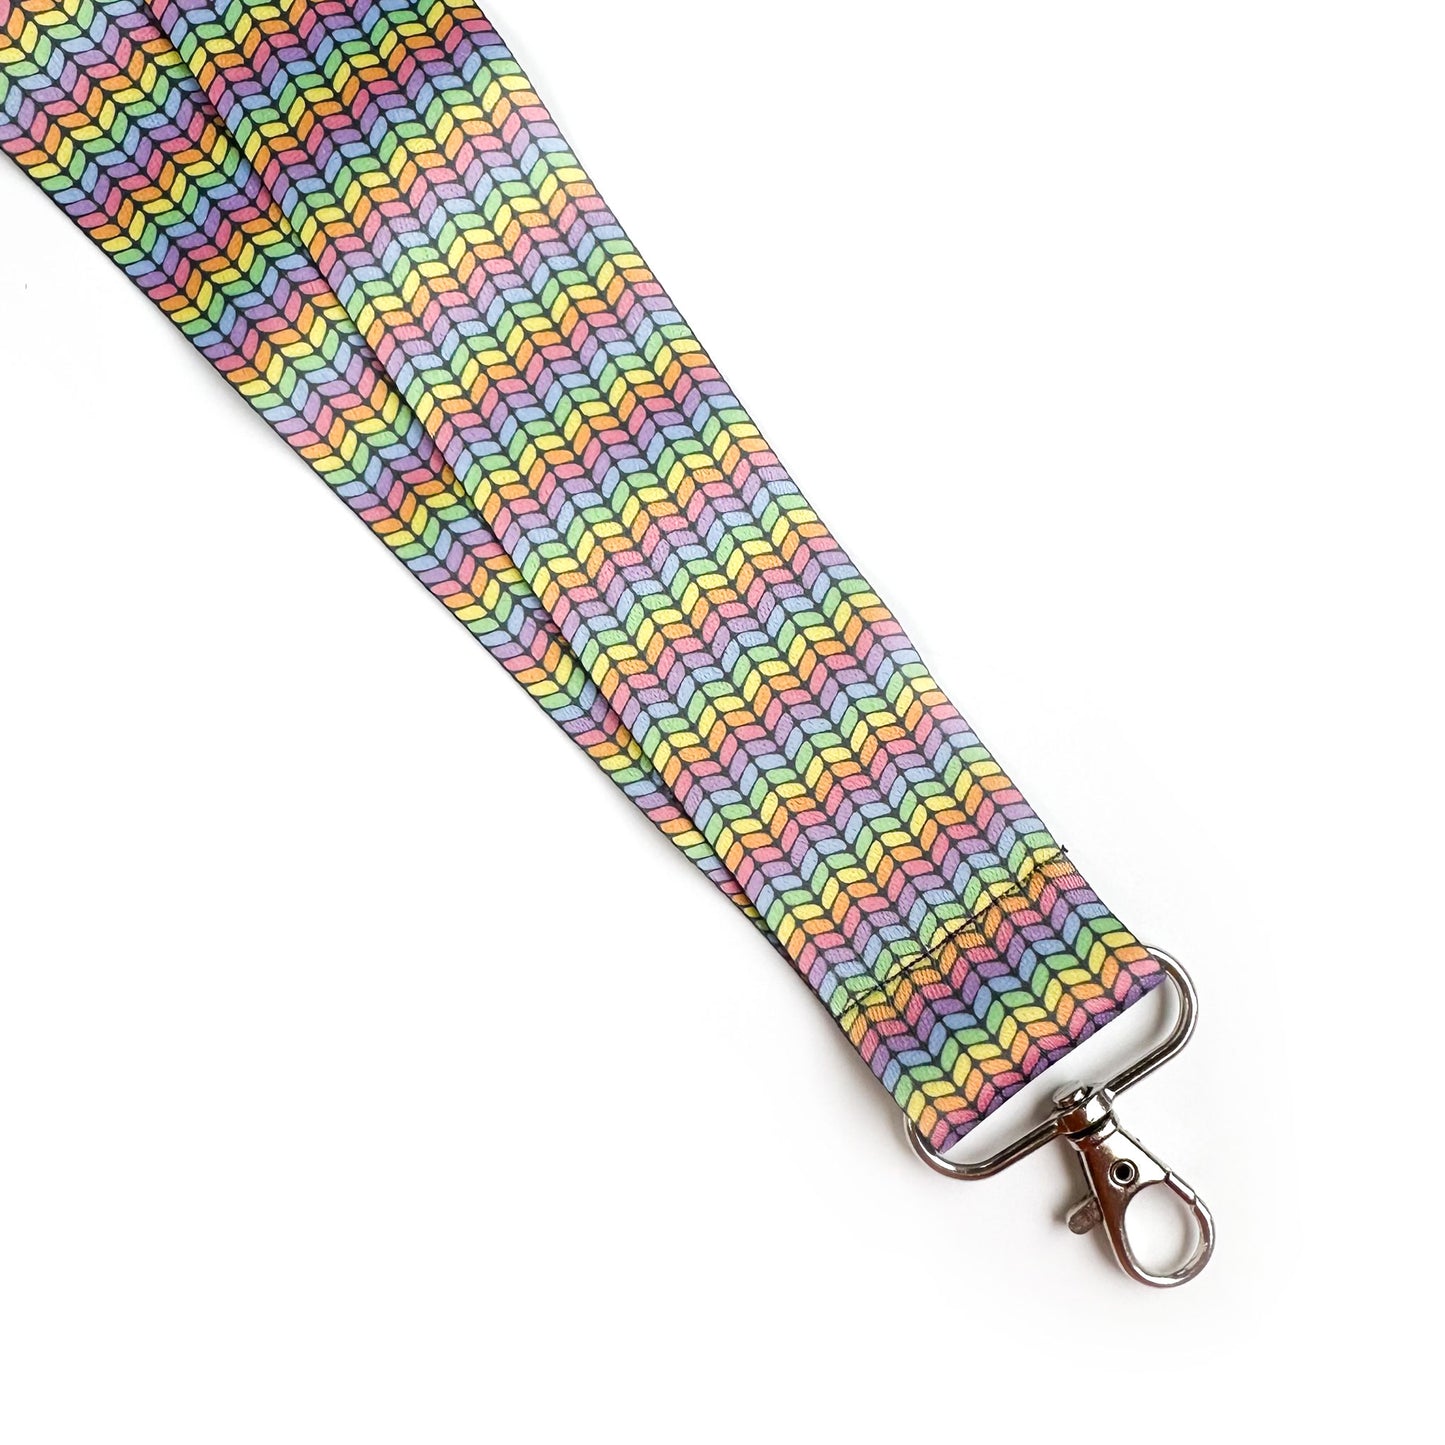 A woven lanyard with a pastel rainbow stockinette stitch graphic printed on it with a silver metal lobster claw clasp at the bottom. 